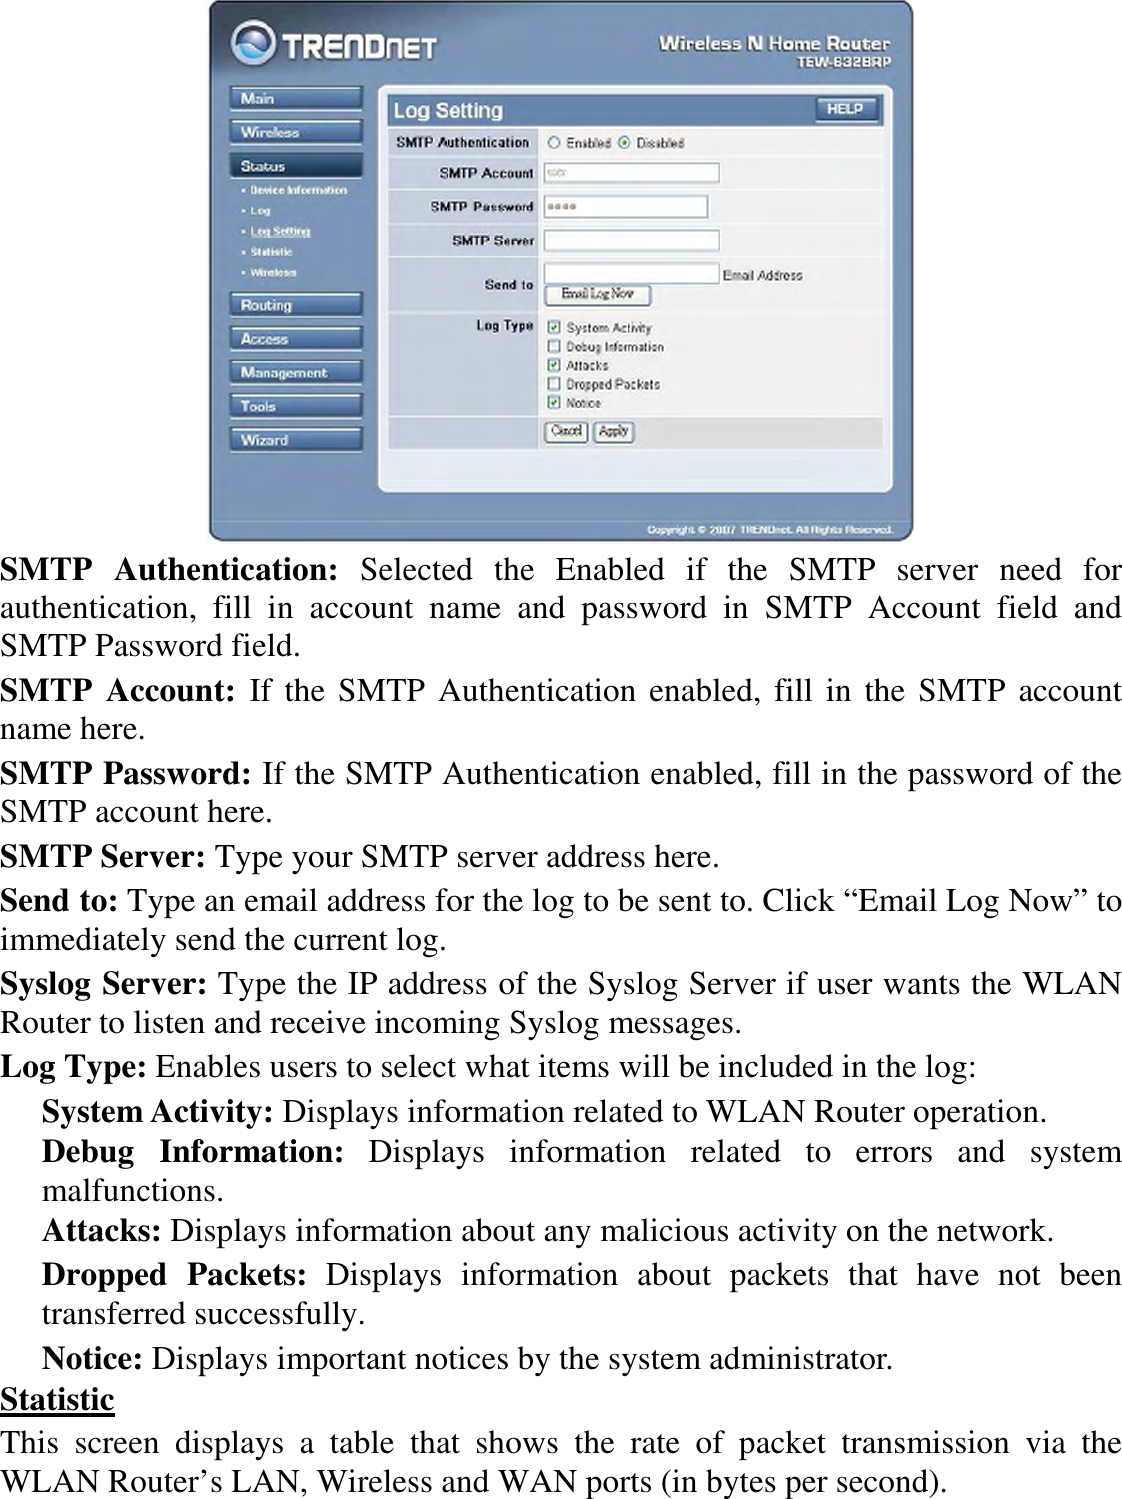  SMTP  Authentication:  Selected  the  Enabled  if  the  SMTP  server  need  for authentication,  fill  in  account  name  and  password  in  SMTP  Account  field  and SMTP Password field. SMTP  Account:  If the SMTP Authentication enabled, fill in the SMTP account name here. SMTP Password: If the SMTP Authentication enabled, fill in the password of the SMTP account here. SMTP Server: Type your SMTP server address here. Send to: Type an email address for the log to be sent to. Click “Email Log Now” to immediately send the current log. Syslog Server: Type the IP address of the Syslog Server if user wants the WLAN Router to listen and receive incoming Syslog messages. Log Type: Enables users to select what items will be included in the log: System Activity: Displays information related to WLAN Router operation. Debug  Information:  Displays  information  related  to  errors  and  system malfunctions. Attacks: Displays information about any malicious activity on the network. Dropped  Packets:  Displays  information  about  packets  that  have  not  been transferred successfully. Notice: Displays important notices by the system administrator. Statistic This  screen  displays  a  table  that  shows  the  rate  of  packet  transmission  via  the WLAN Router’s LAN, Wireless and WAN ports (in bytes per second). 